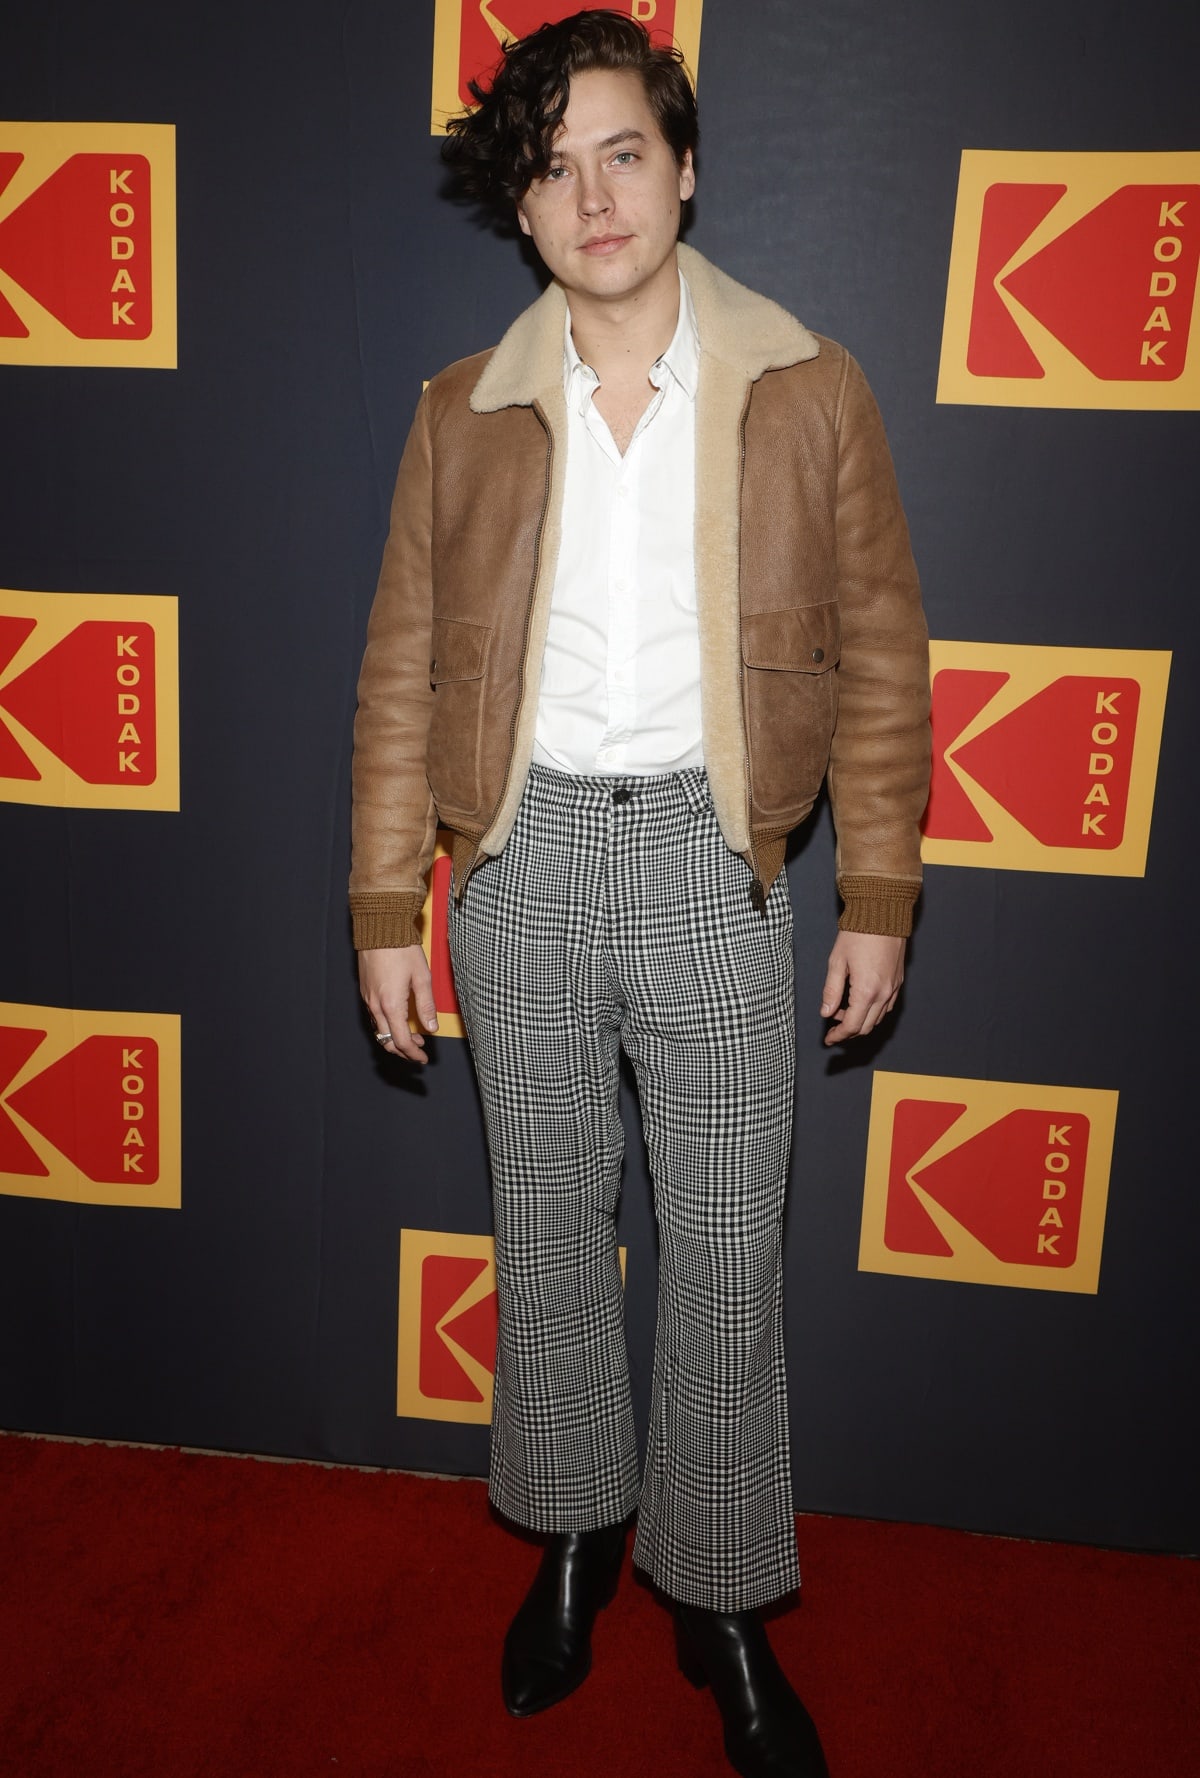 Cole Sprouse stands at 5 feet and 10 ½ inches, and he has an outstanding net worth of $8 million